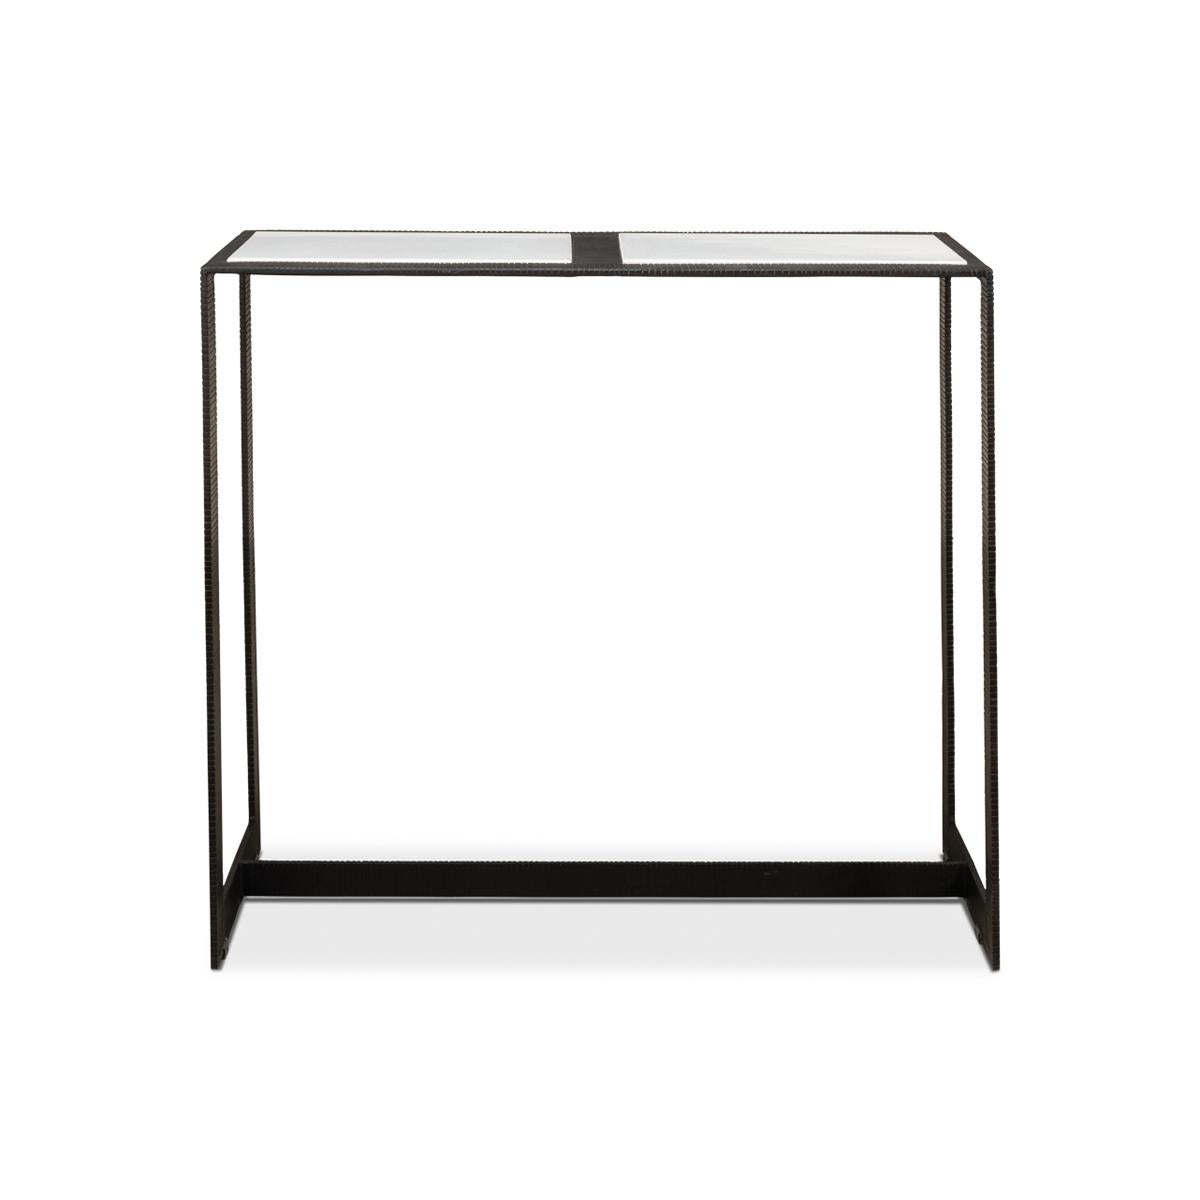 The epitome of contemporary elegance: our small Modern Marble Top Iron Console Table. With a sleek black iron frame, featuring a captivating ridged design, this piece exudes sophistication and style. The white marble top, inset flawlessly into the